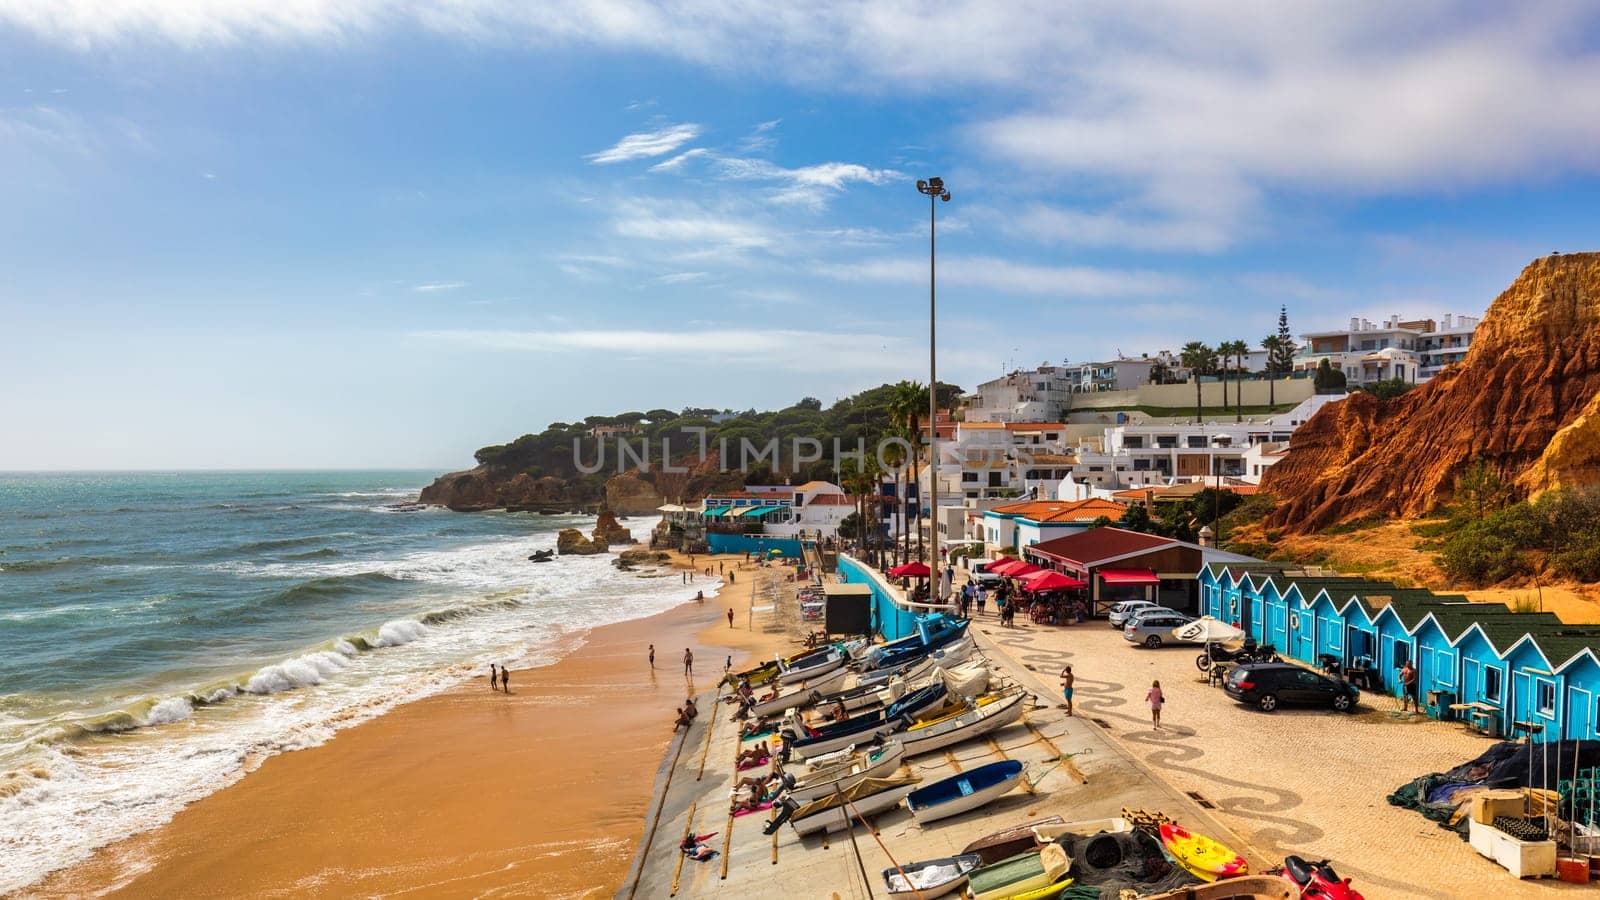 Amazing view of town Olhos de Agua in Albufeira, Algarve, Portugal. Coastal view of town Olhos de Agua, Albufeira area, Algarve, Portugal. by DaLiu